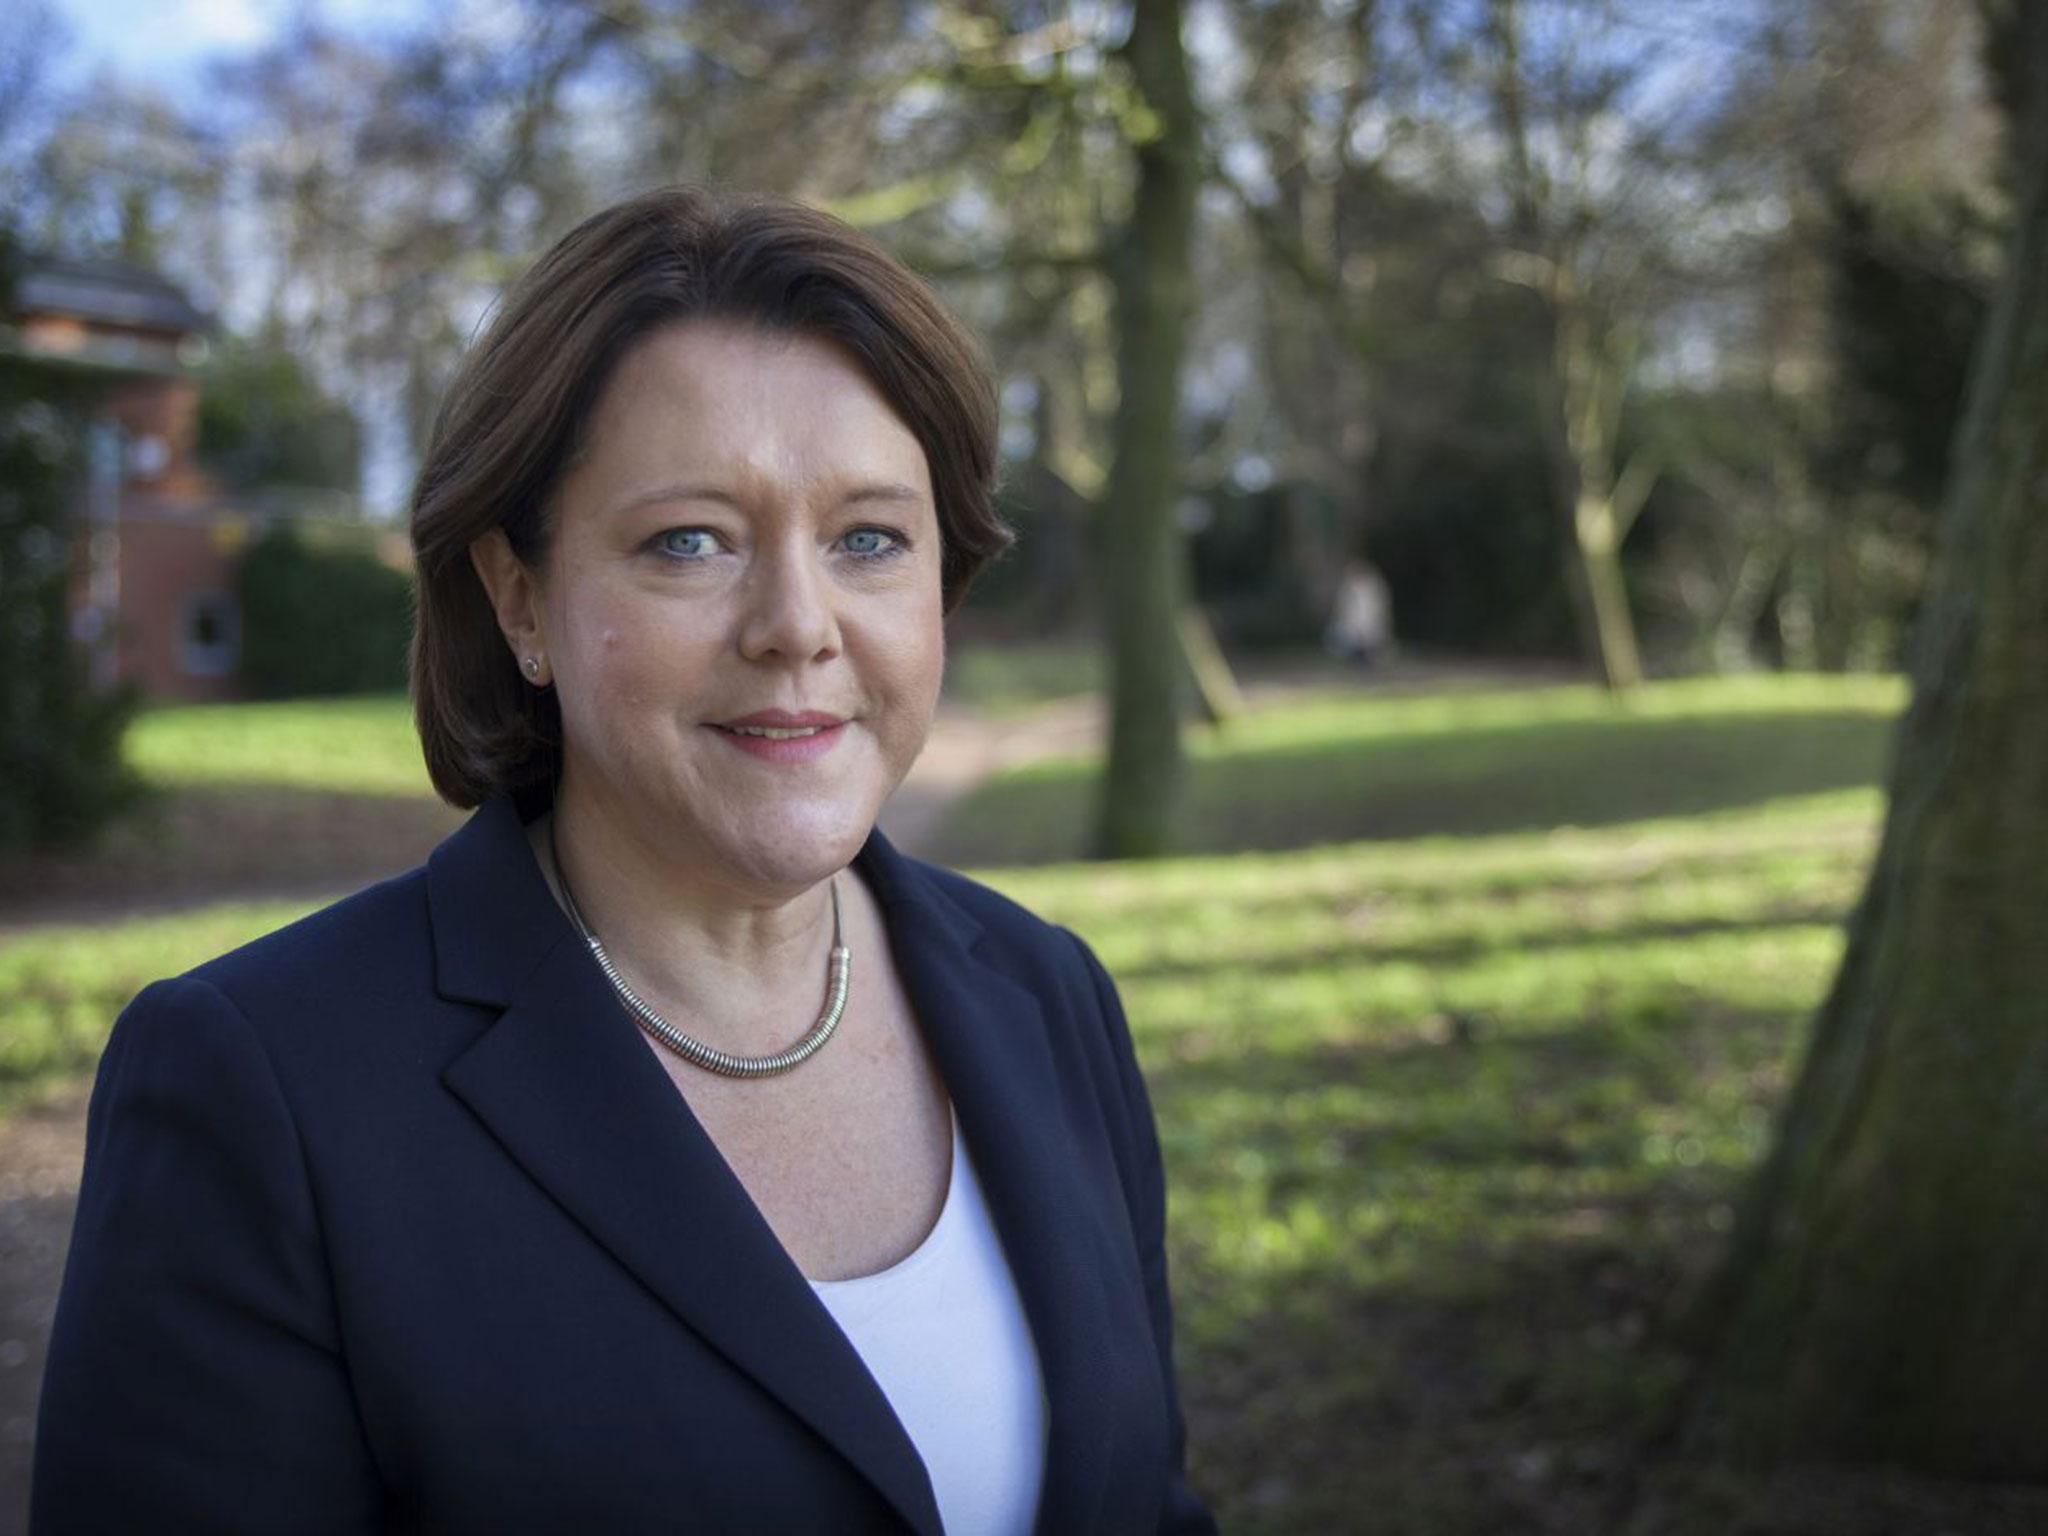 Former cabinet minister Maria Miller, chair of the Women and Equalities Committee